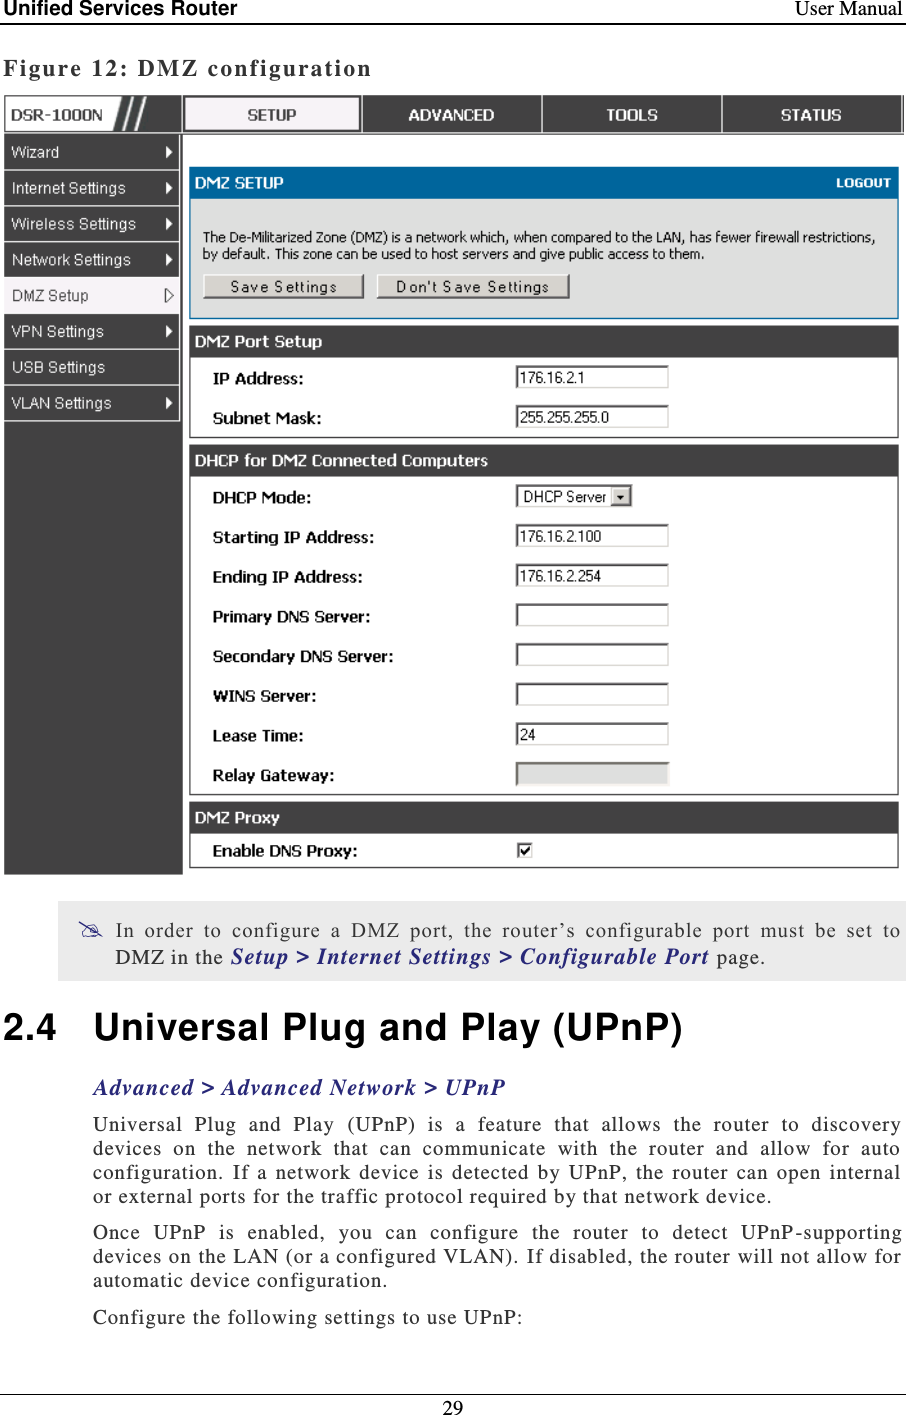 Unified Services Router    User Manual 29  Figure 12: DM Z configuration   In  order  to  configure  a  DMZ  port,  the  router’s  configurable  port  must  be  set  to DMZ in the Setup &gt; Internet Settings &gt; Configurable Port page.  2.4  Universal Plug and Play (UPnP) Advanced &gt; Advanced Network &gt; UPnP Universal  Plug  and  Play  (UPnP)  is  a  feature  that  allows  the  router  to  discovery devices  on  the  network  that  can  communicate  with  the  router  and  allow  for  auto configuration.  If  a  network  device  is  detected  by  UPnP,  the  router  can  open  internal or external ports for the traffic protocol required by that network device.  Once  UPnP  is  enabled,  you  can  configure  the  router  to  detect  UPnP -supporting devices on the LAN (or a configured VLAN).  If disabled, the router will not allow for automatic device configuration.  Configure the following settings to use UPnP: 